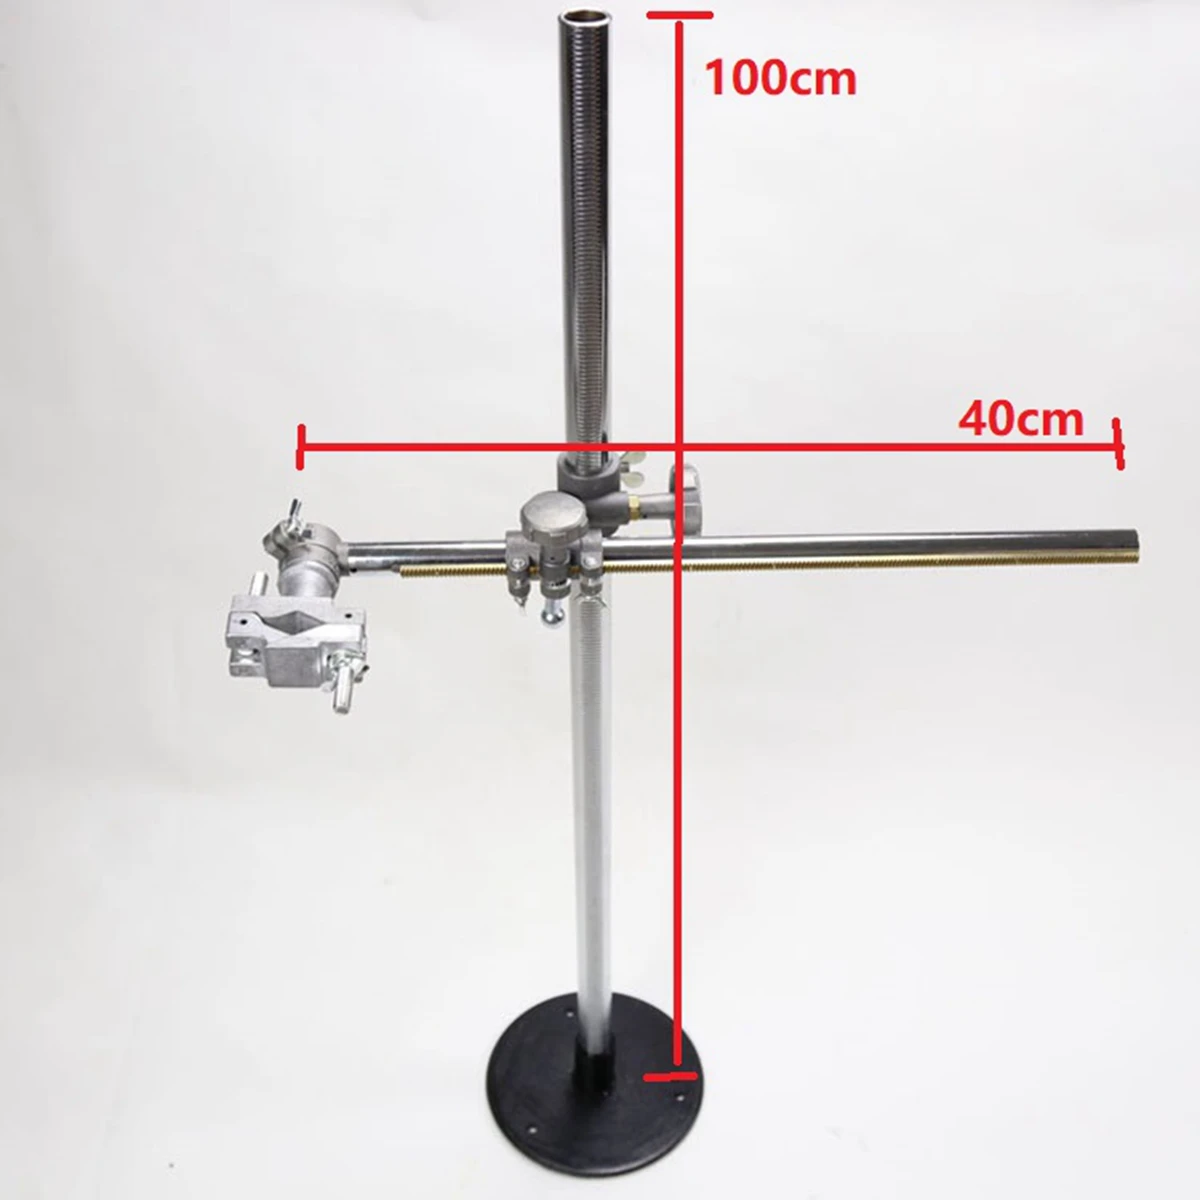 100cm x 50cm  Welding Torch Holder Support Mig Gun Holder Clamp Mountings MIG MAG CO2 TIG Welding Positioner Turntable